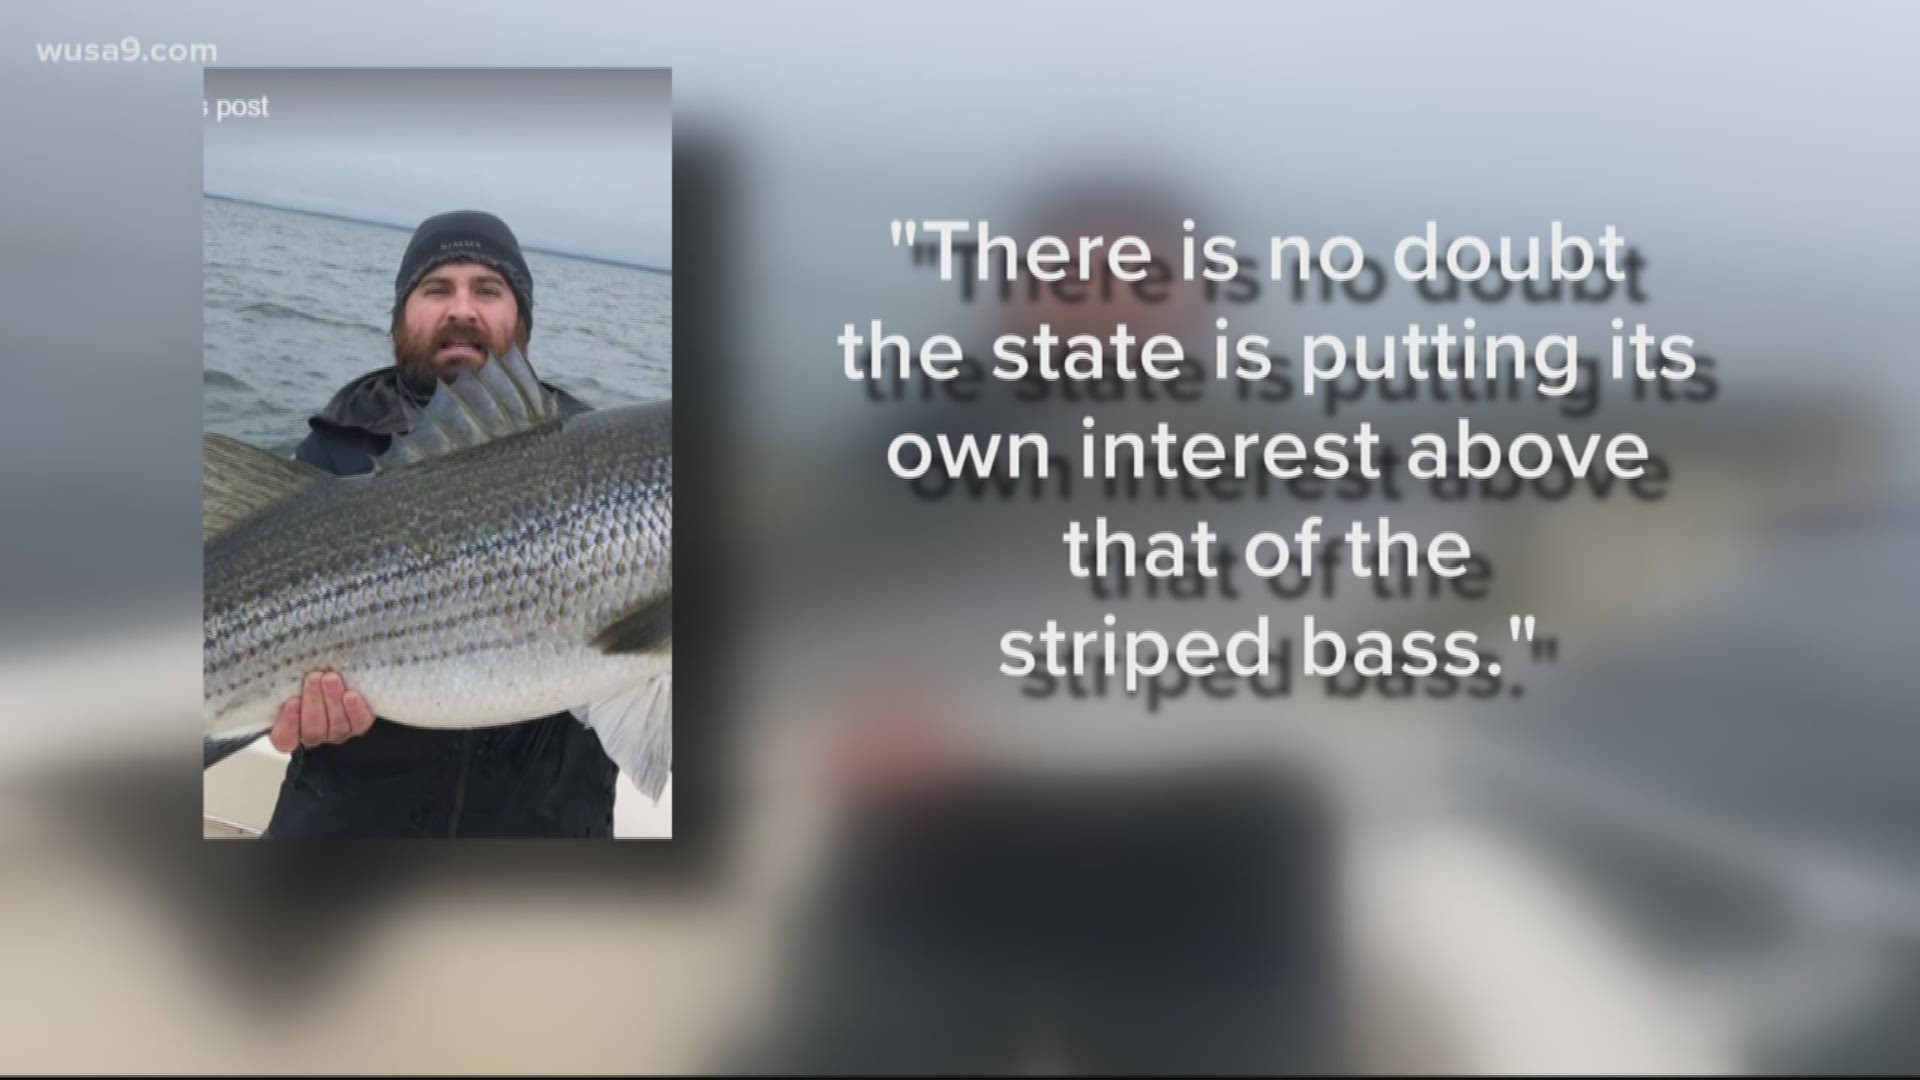 Nick "Redbeard" Lombardi criticizes new Maryland conservation rules allowing trophies to be kept as an "embarrassment" as Rockfish face alarming decline.